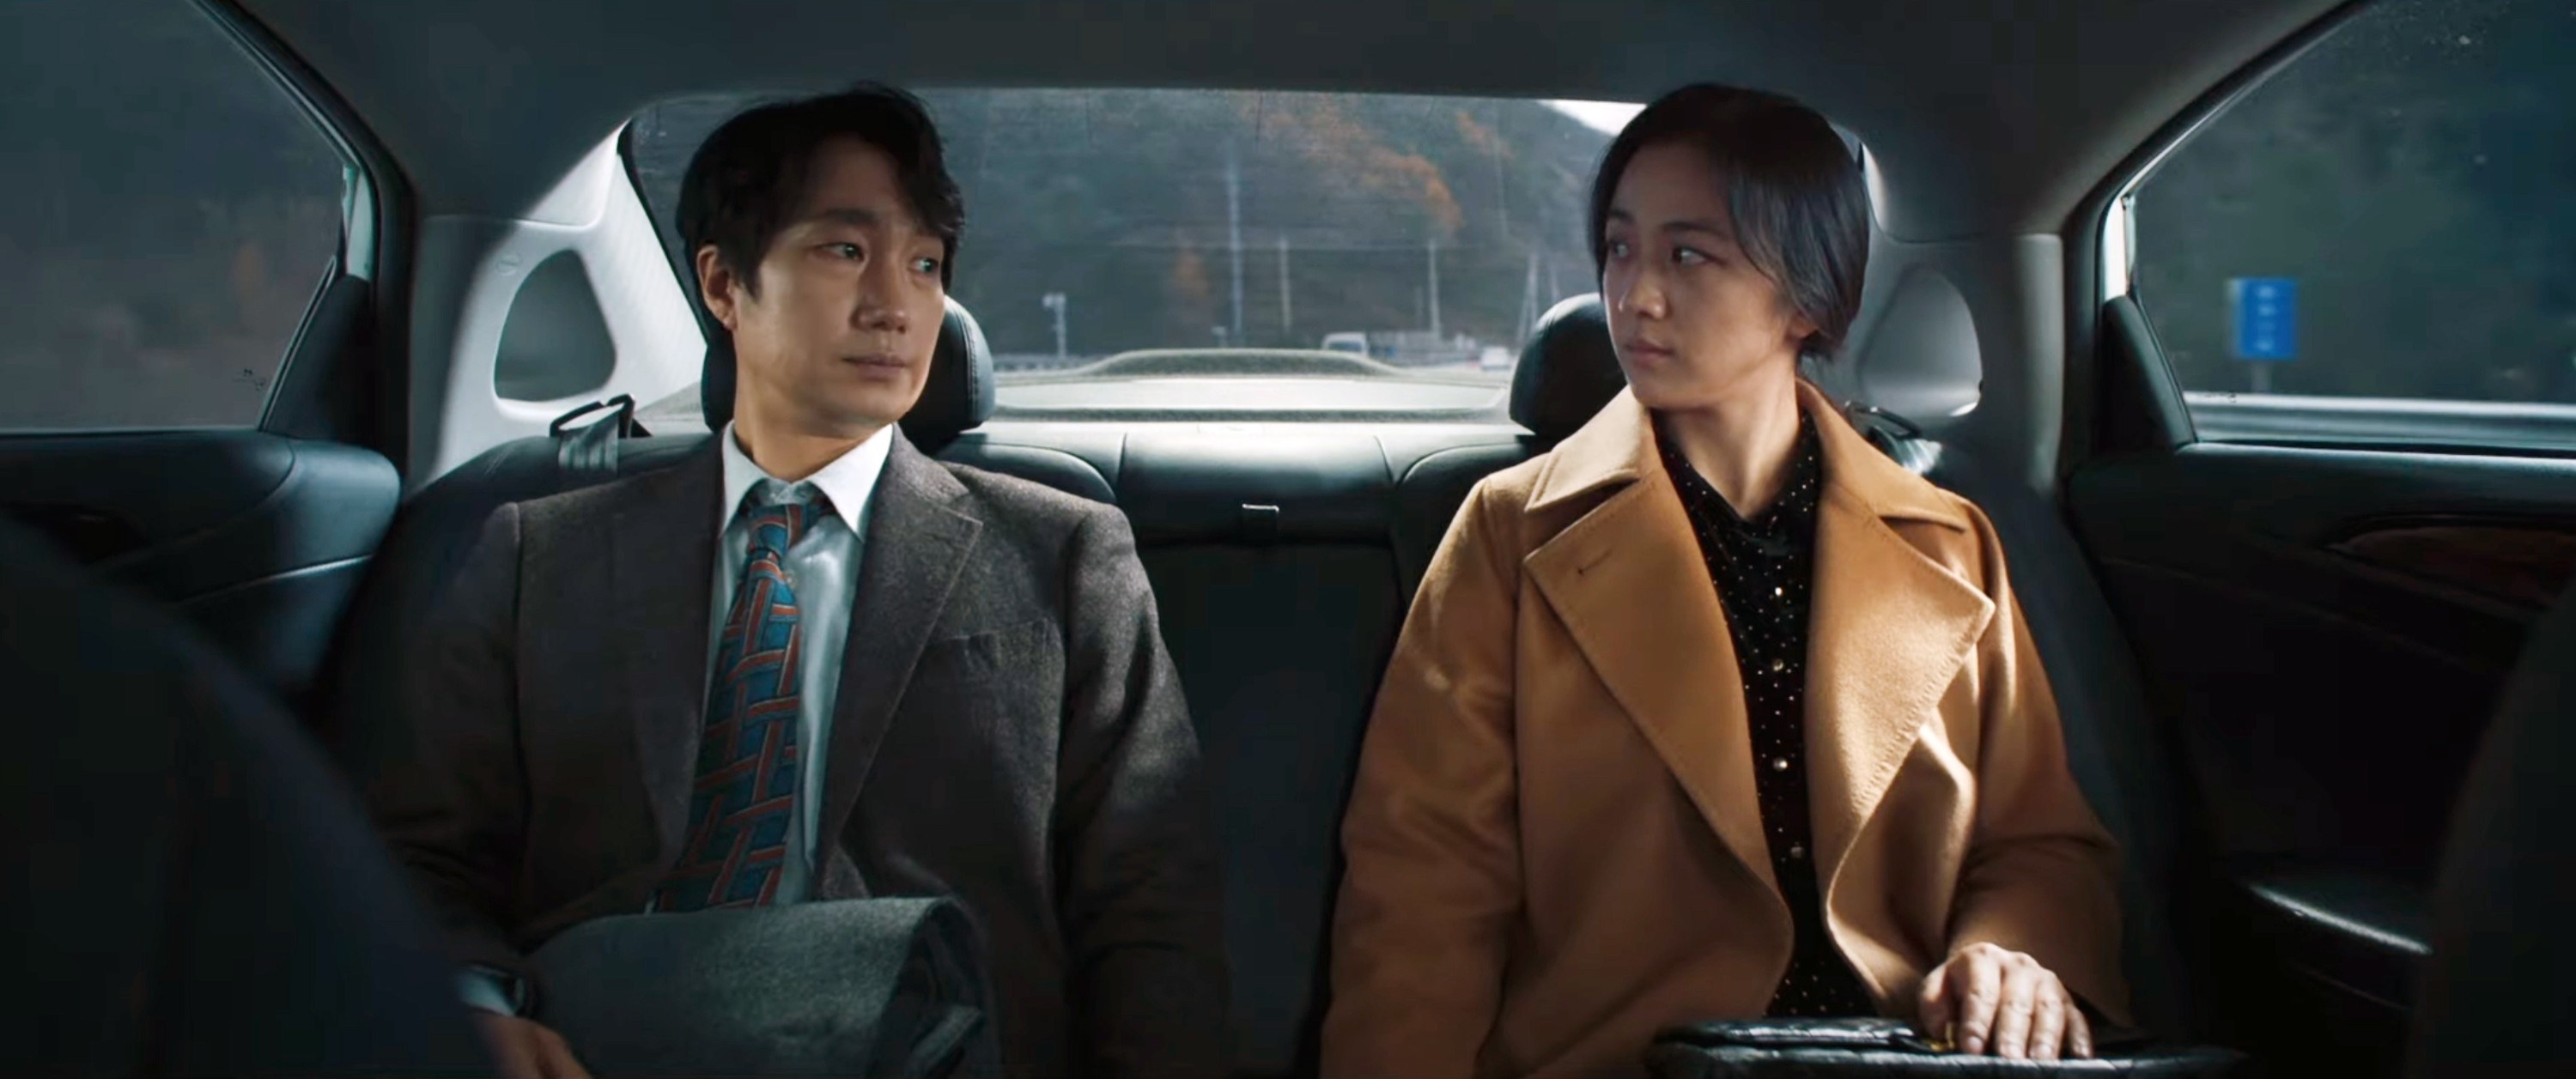 Park Hae-il and Tang Wei sit in the back of a car